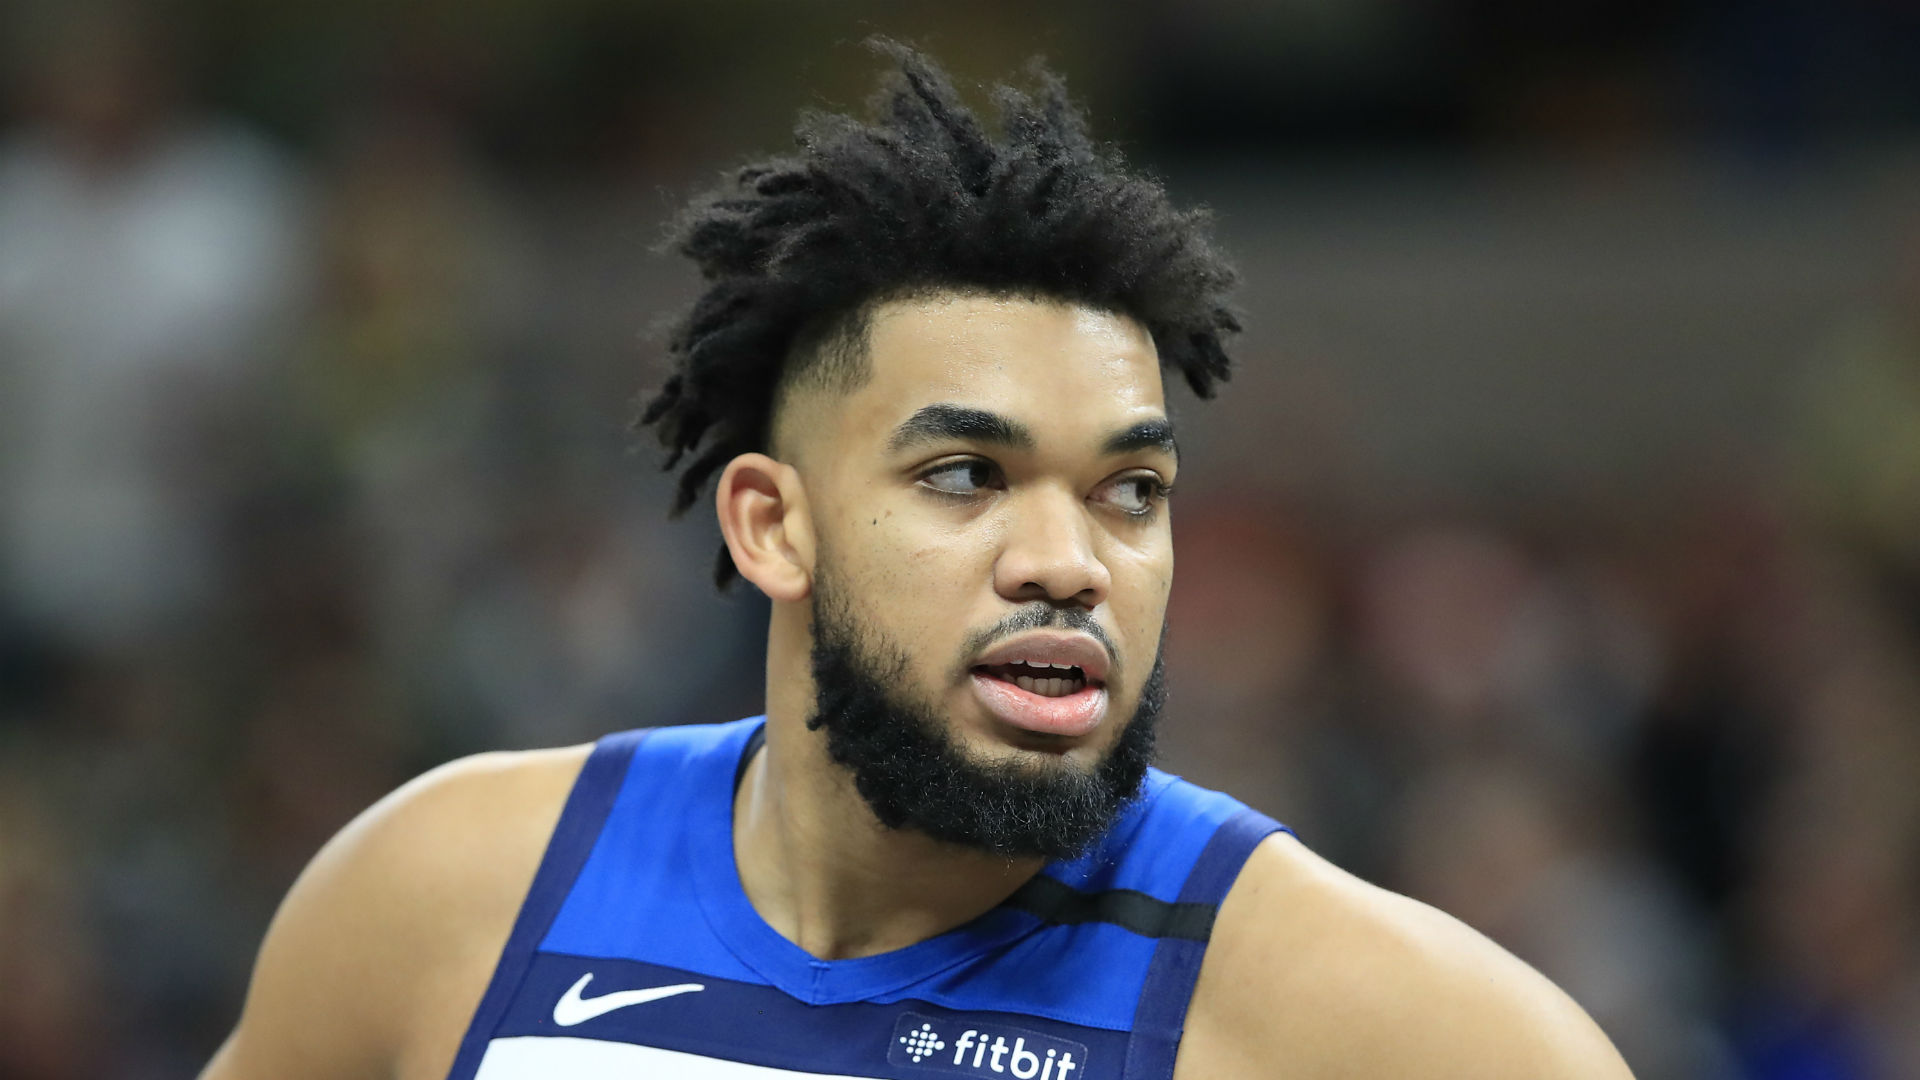 Karl-Anthony Towns said his mother appeared to have turned the corner before her condition deteriorated.